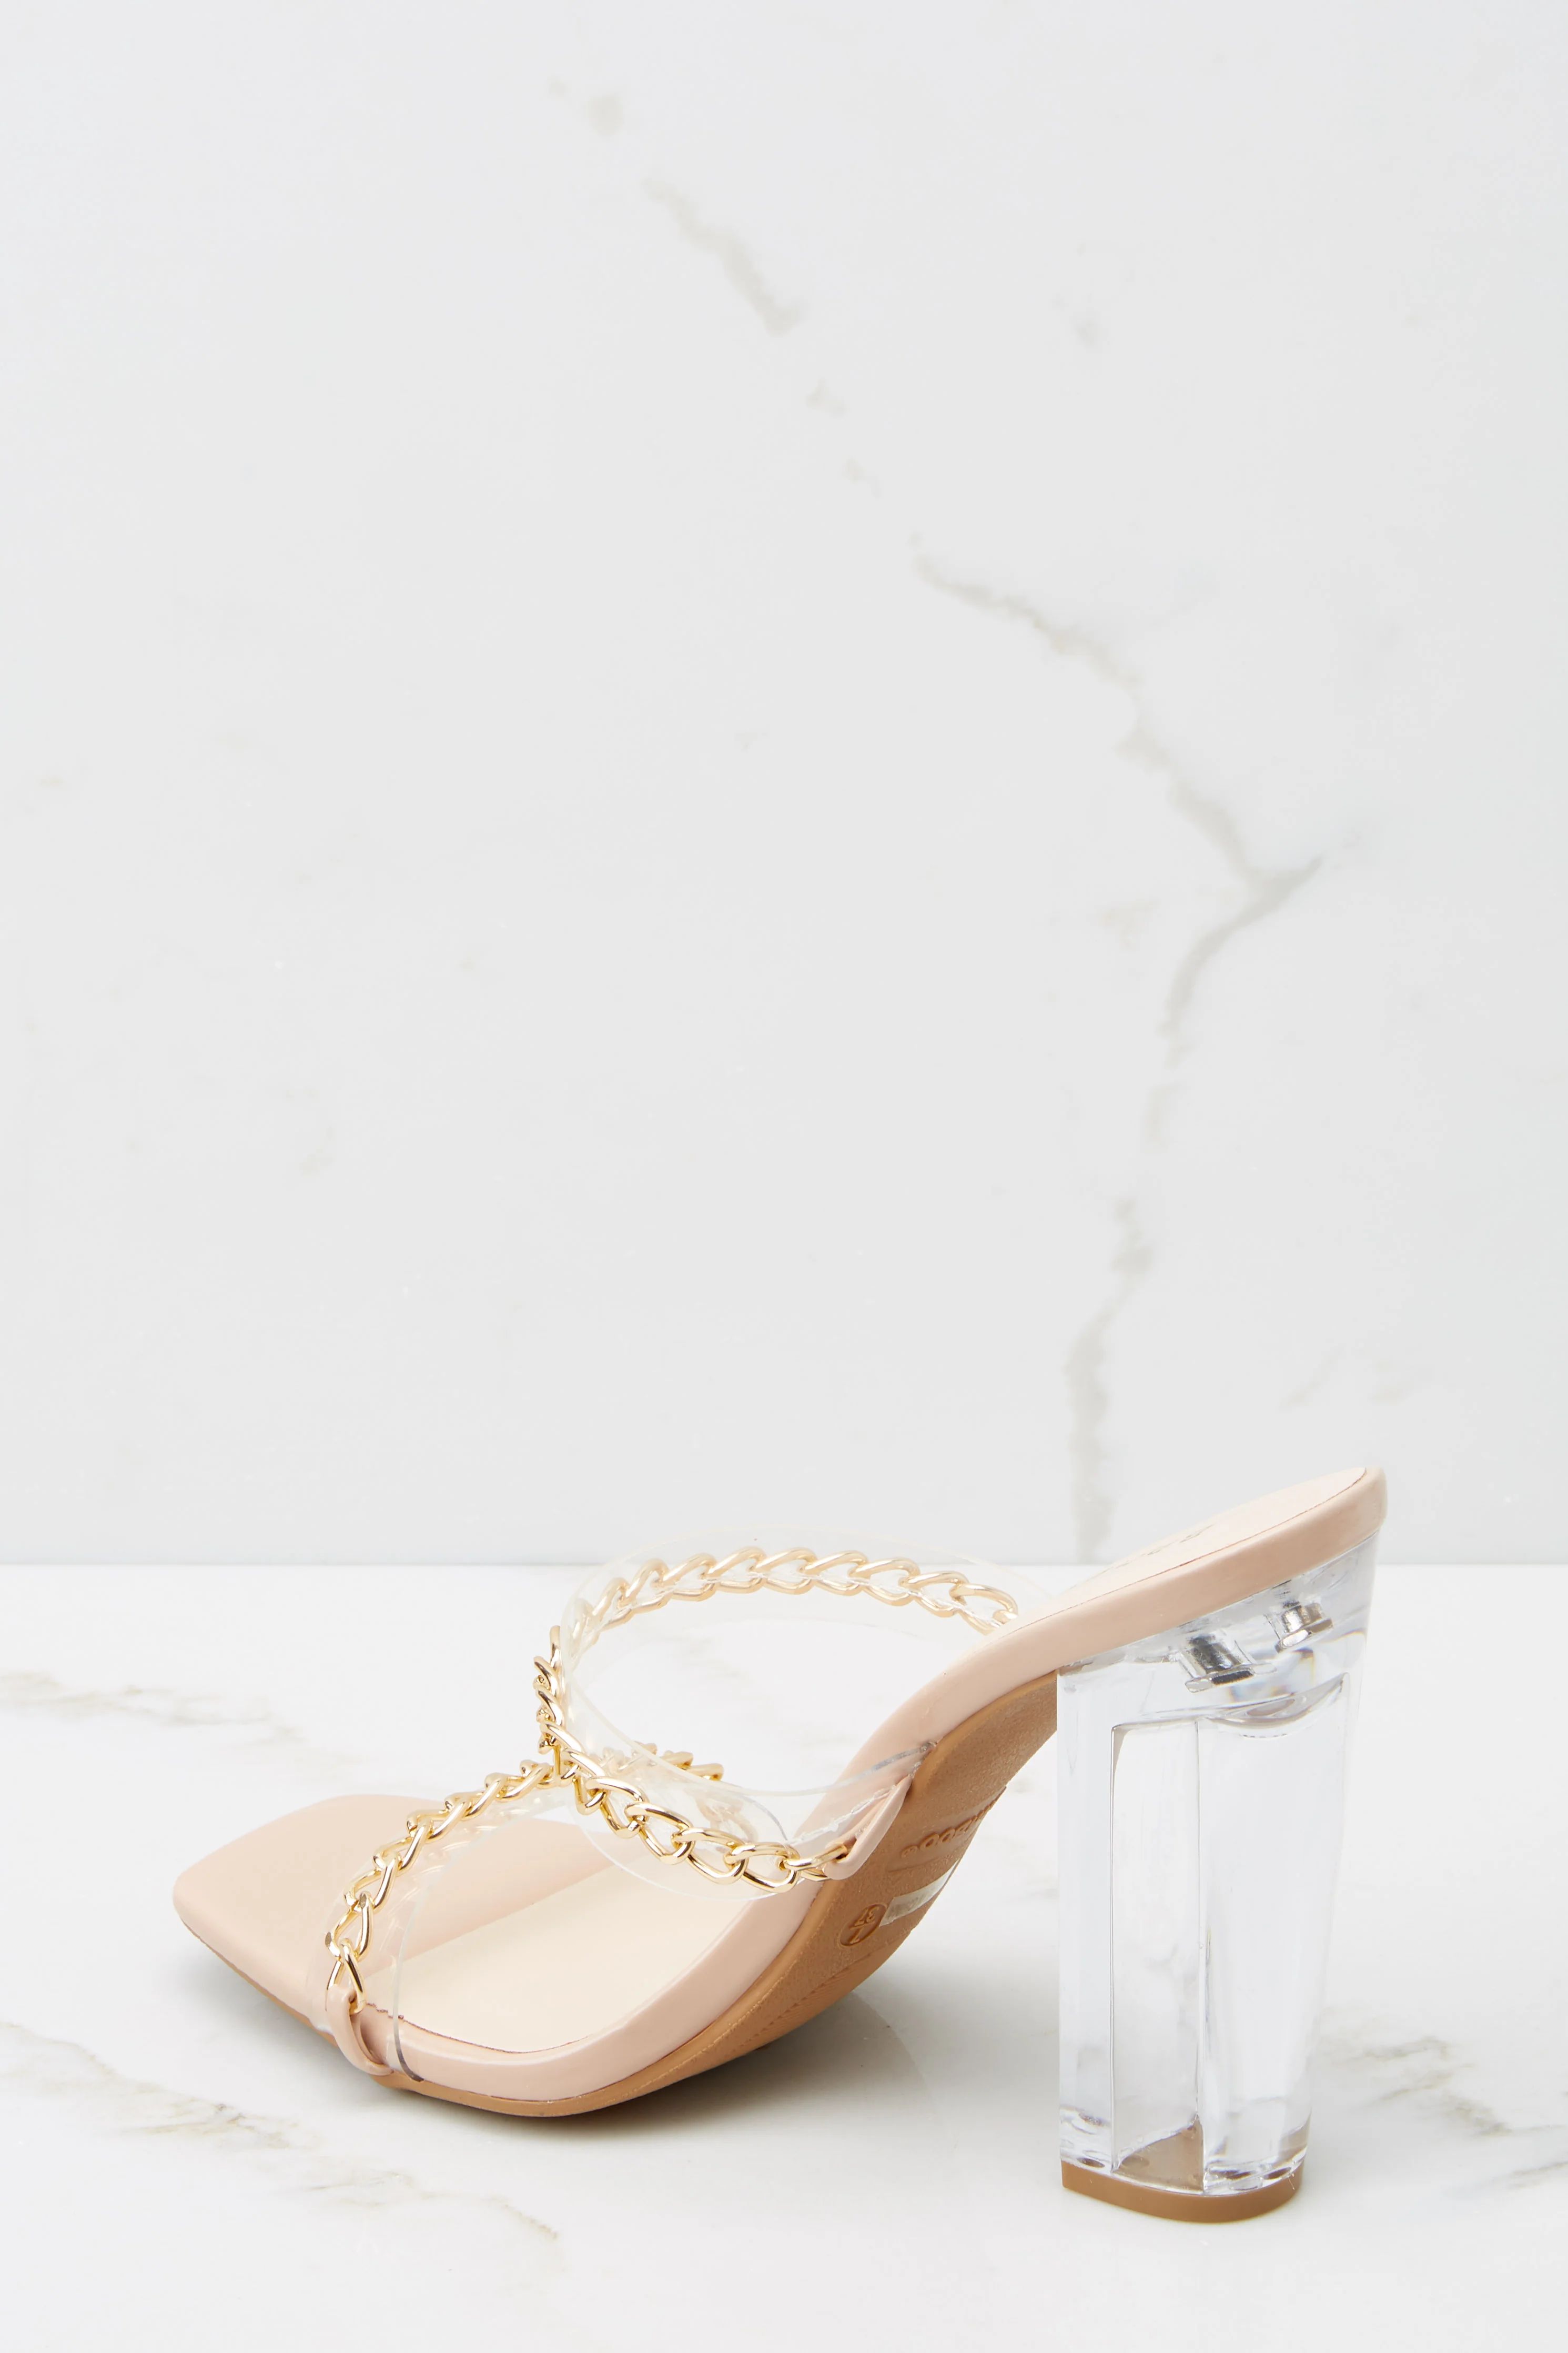 Fashion Edge Nude And Clear Heels | Red Dress 